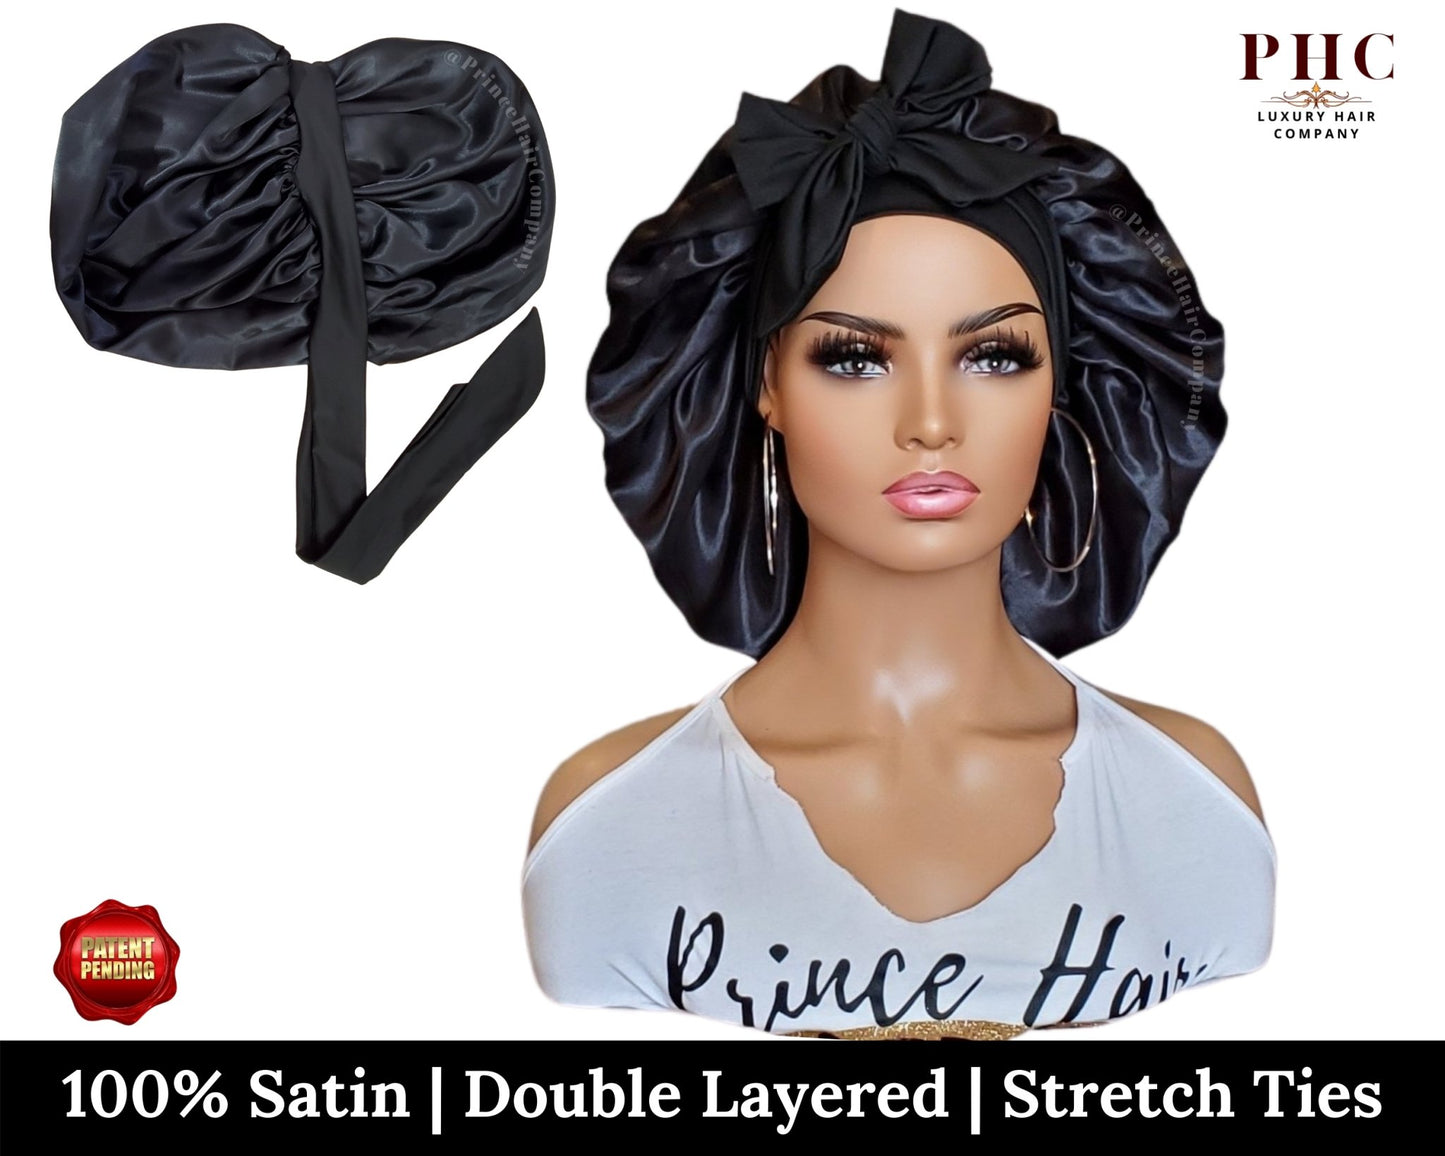 The "Original" Double-Layered Stretch Tie Satin Bonnet - PHC